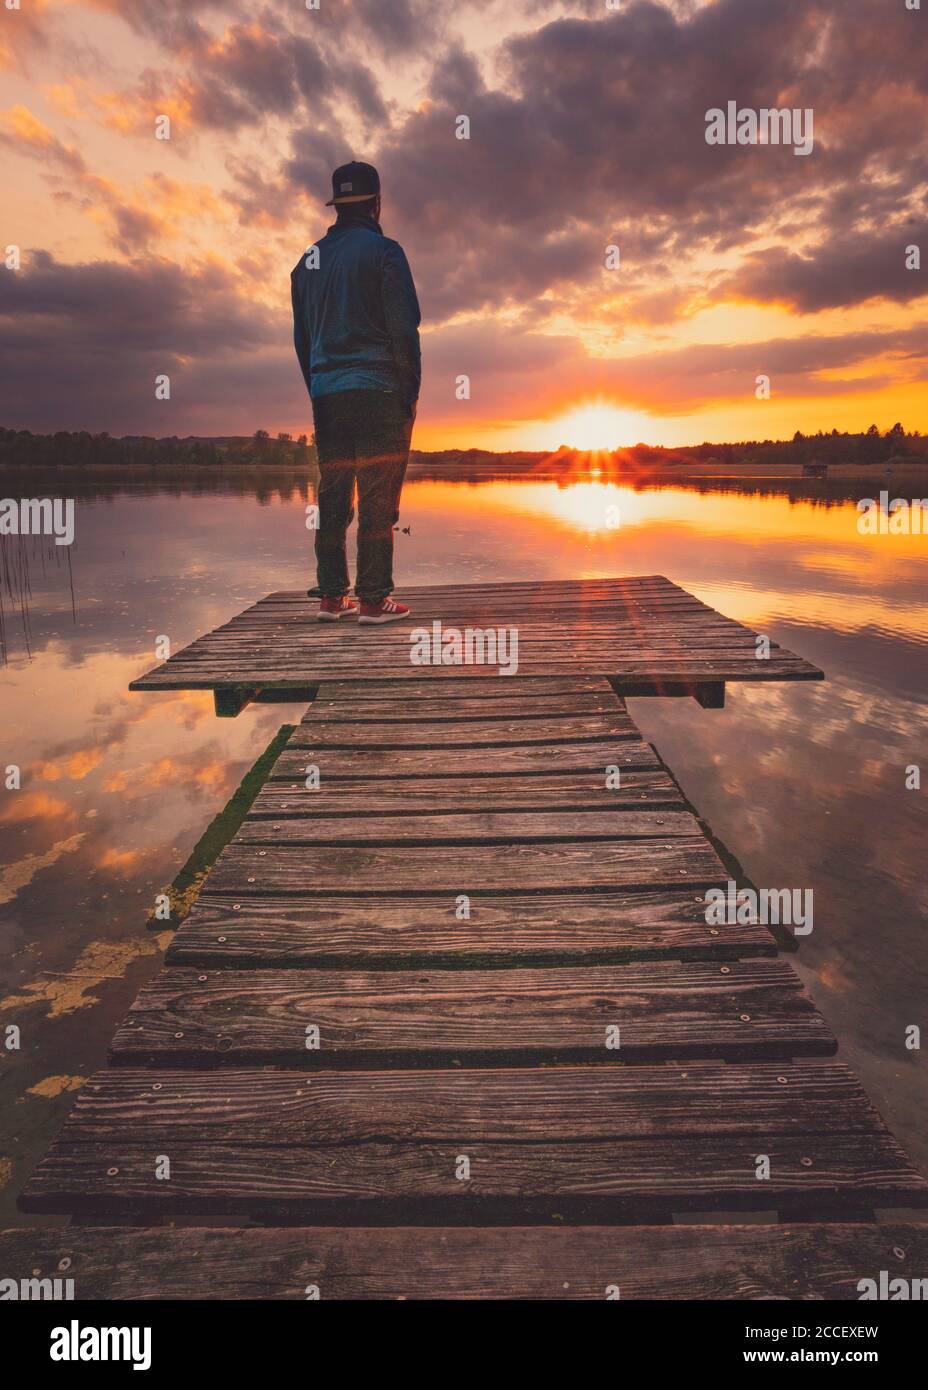 Europe, Germany, Bavaria, Breitbrunn, Chiemsee, Chiemgau, Chiemsee Lake, Man standing on jetty and looking into sunset, Stock Photo